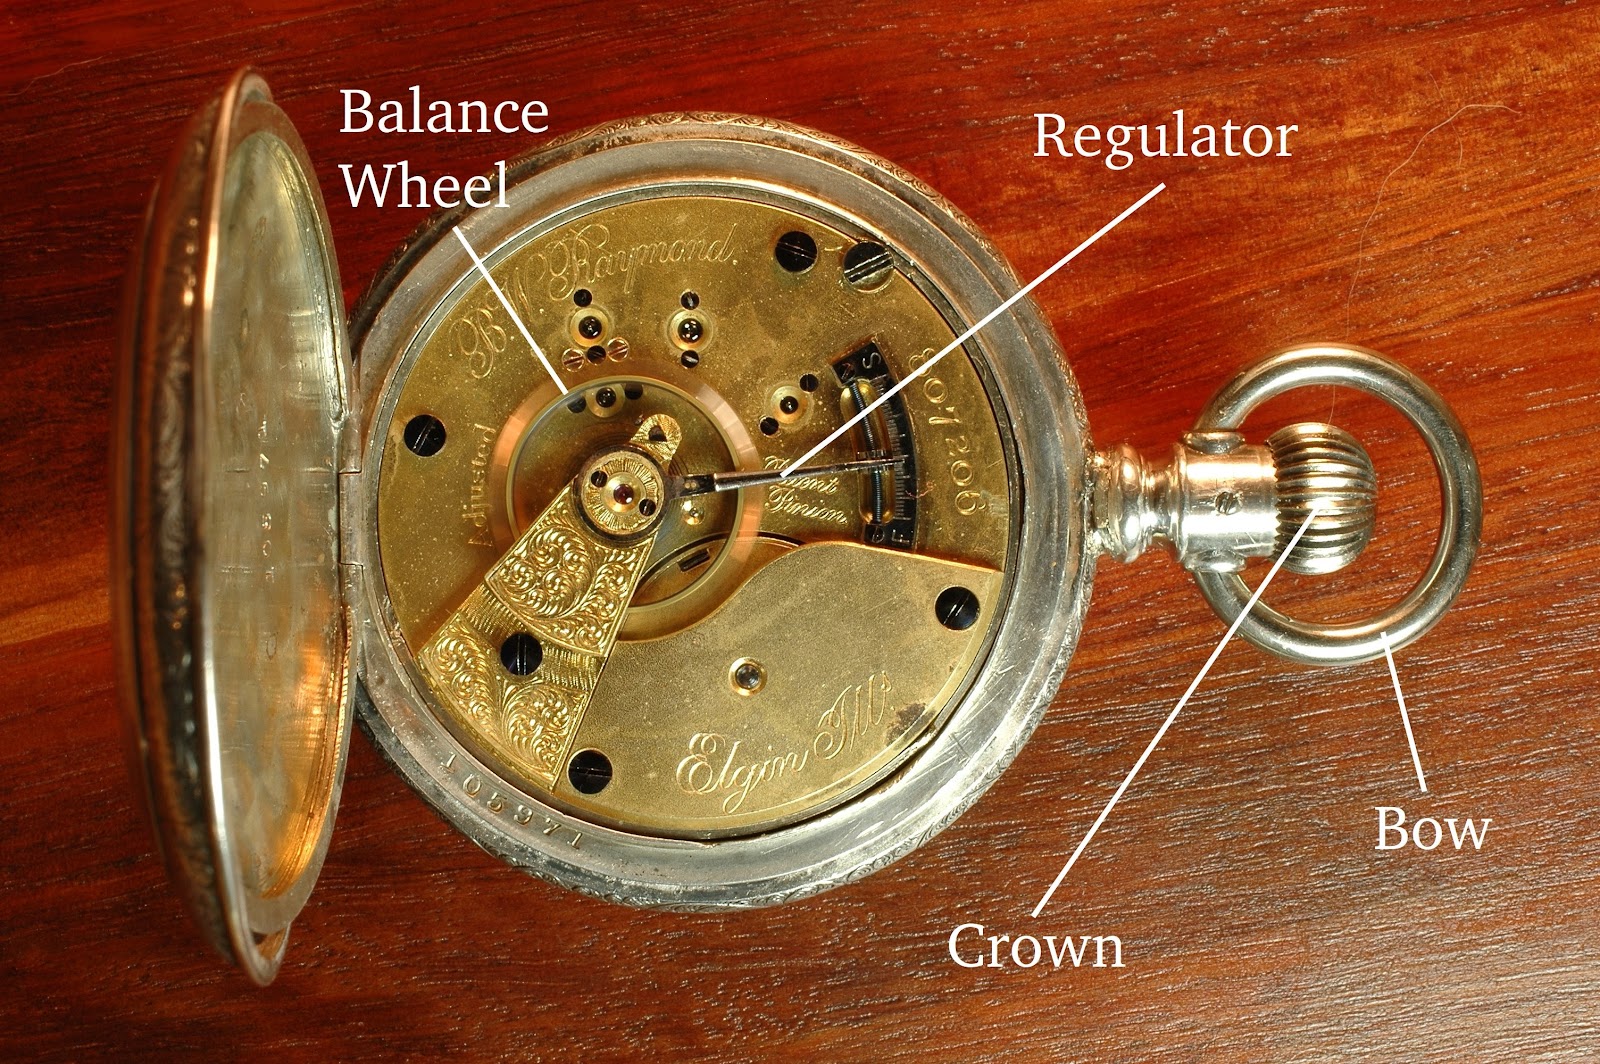 Pocket Watch Parts Labelled The Anatomy Of A Pocket Watch Movement - Photos